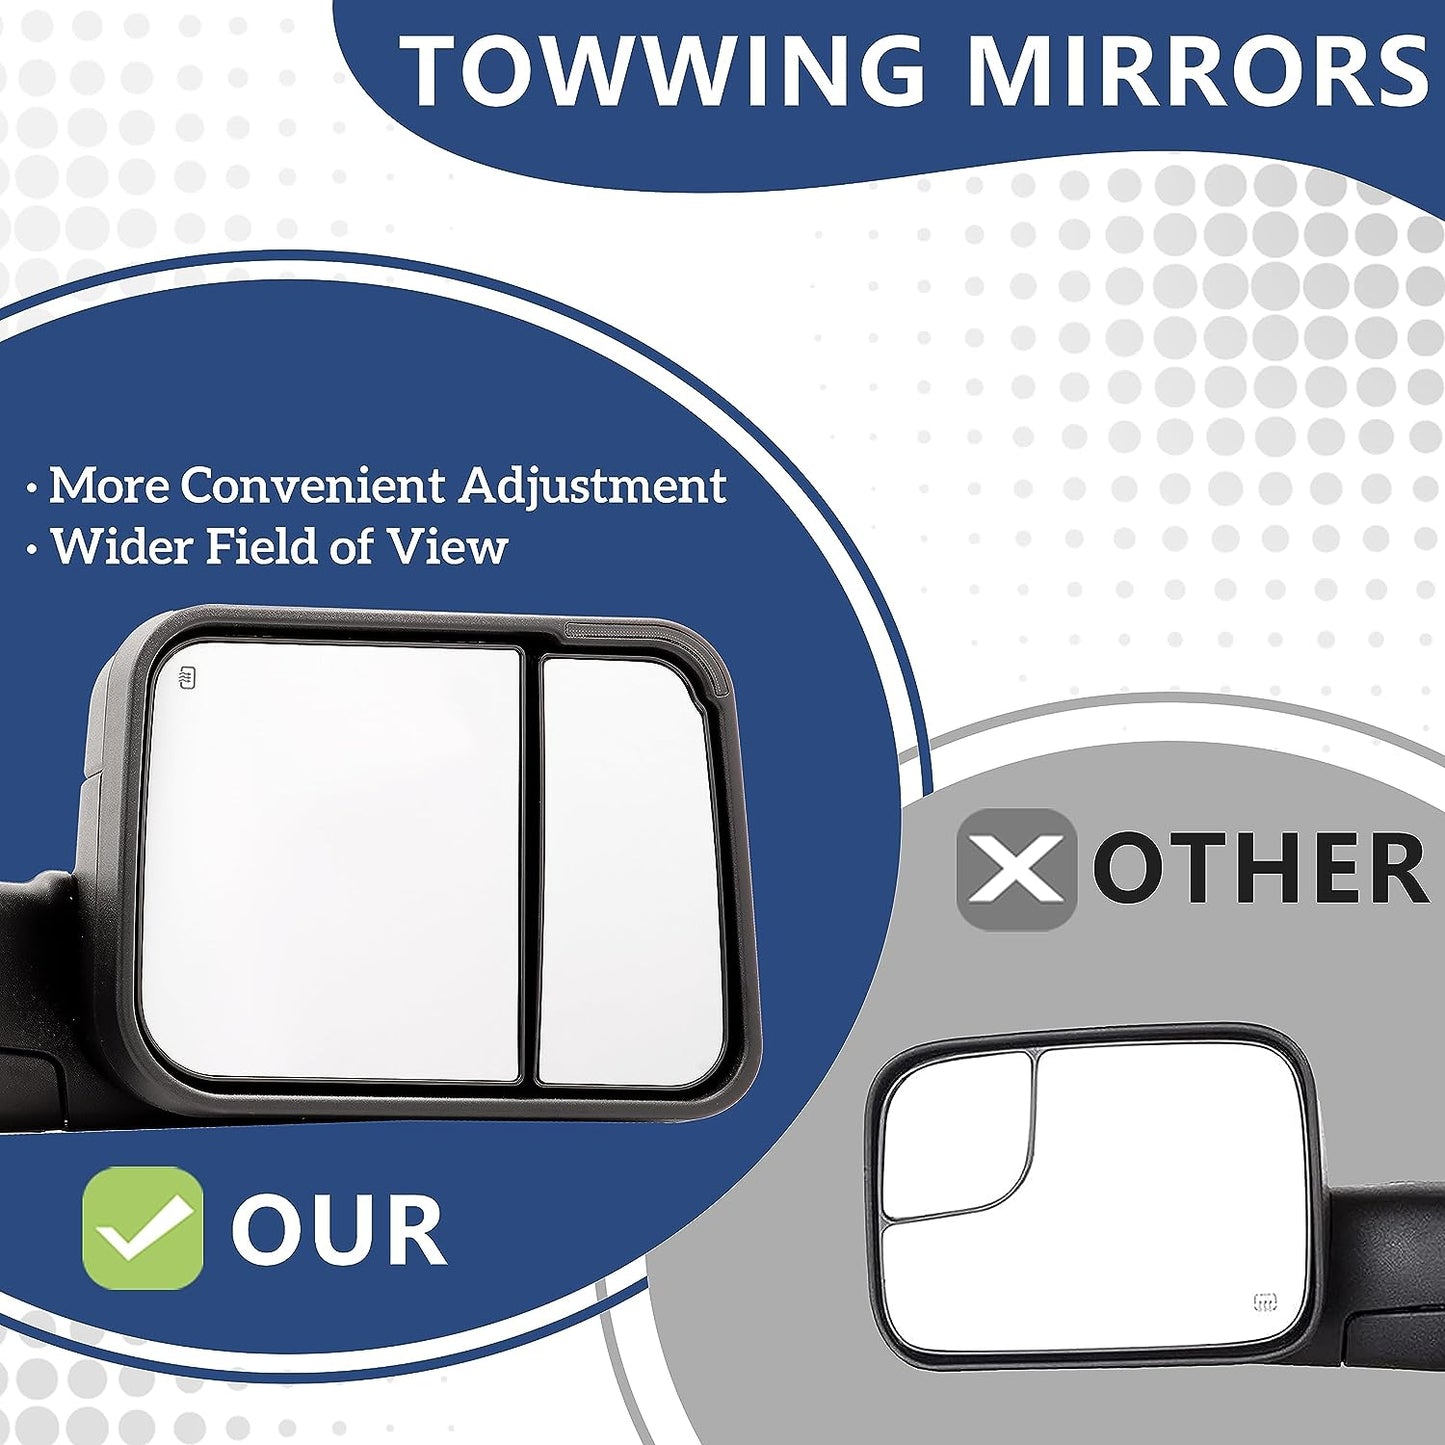 New Style Towing Mirror for Dodge Ram for 2002-2009 Dodge Ram 1500 2500 3500